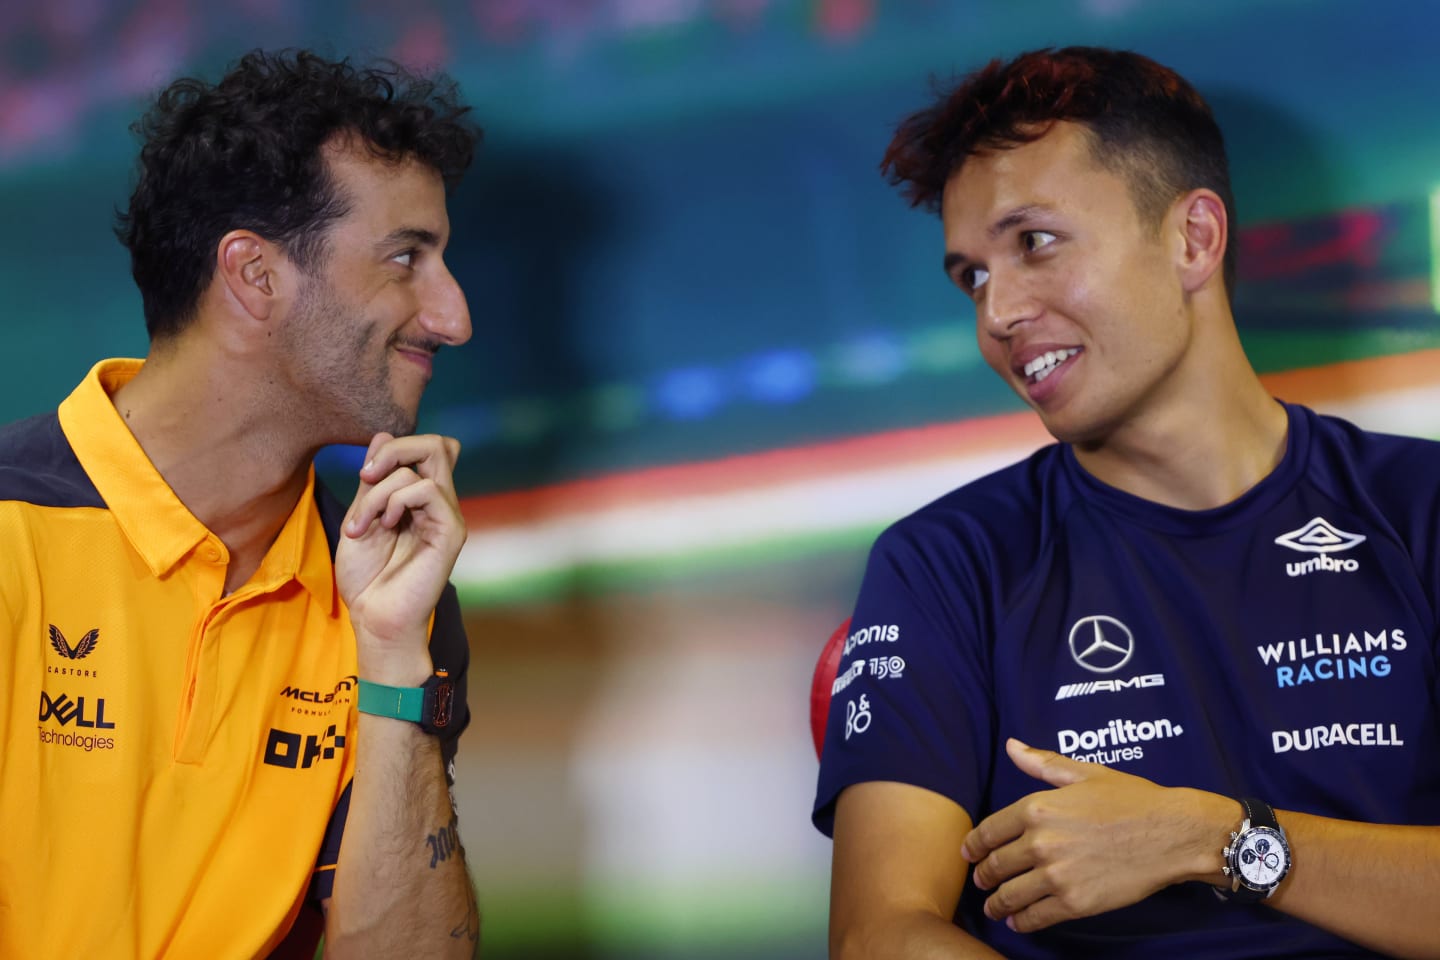 BUDAPEST, HUNGARY - JULY 28: Daniel Ricciardo of Australia and McLaren and Alexander Albon of Thailand and Williams talk in the Drivers Press Conference during previews ahead of the F1 Grand Prix of Hungary at Hungaroring on July 28, 2022 in Budapest, Hungary. (Photo by Bryn Lennon/Getty Images)